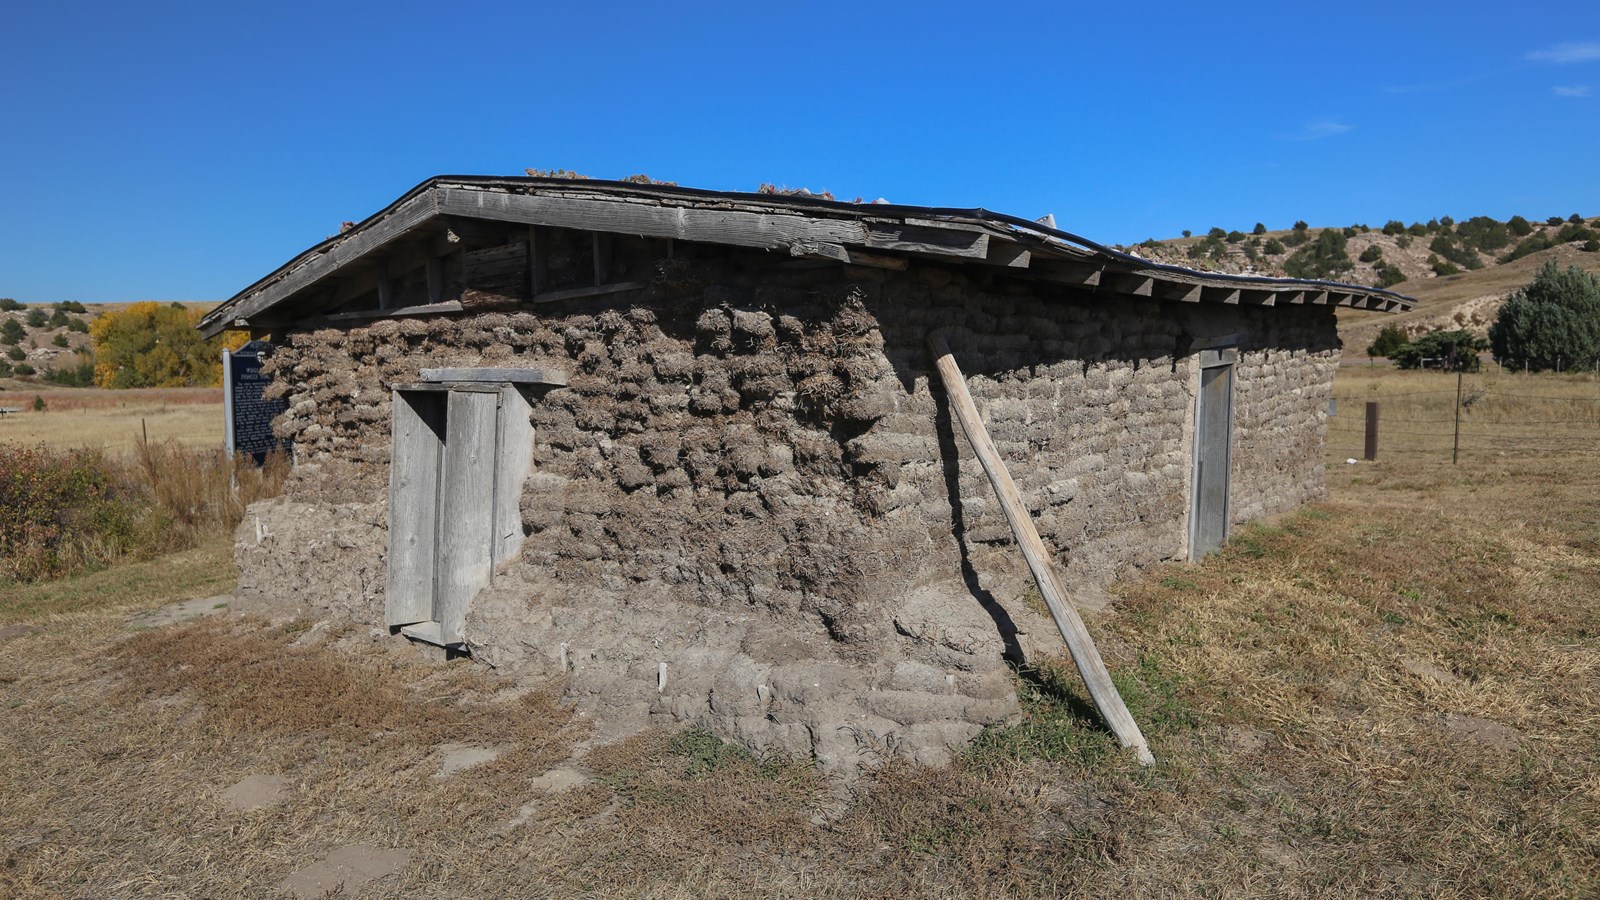 A small square house made out of dirt bricks, with one opening on each side and a roof.